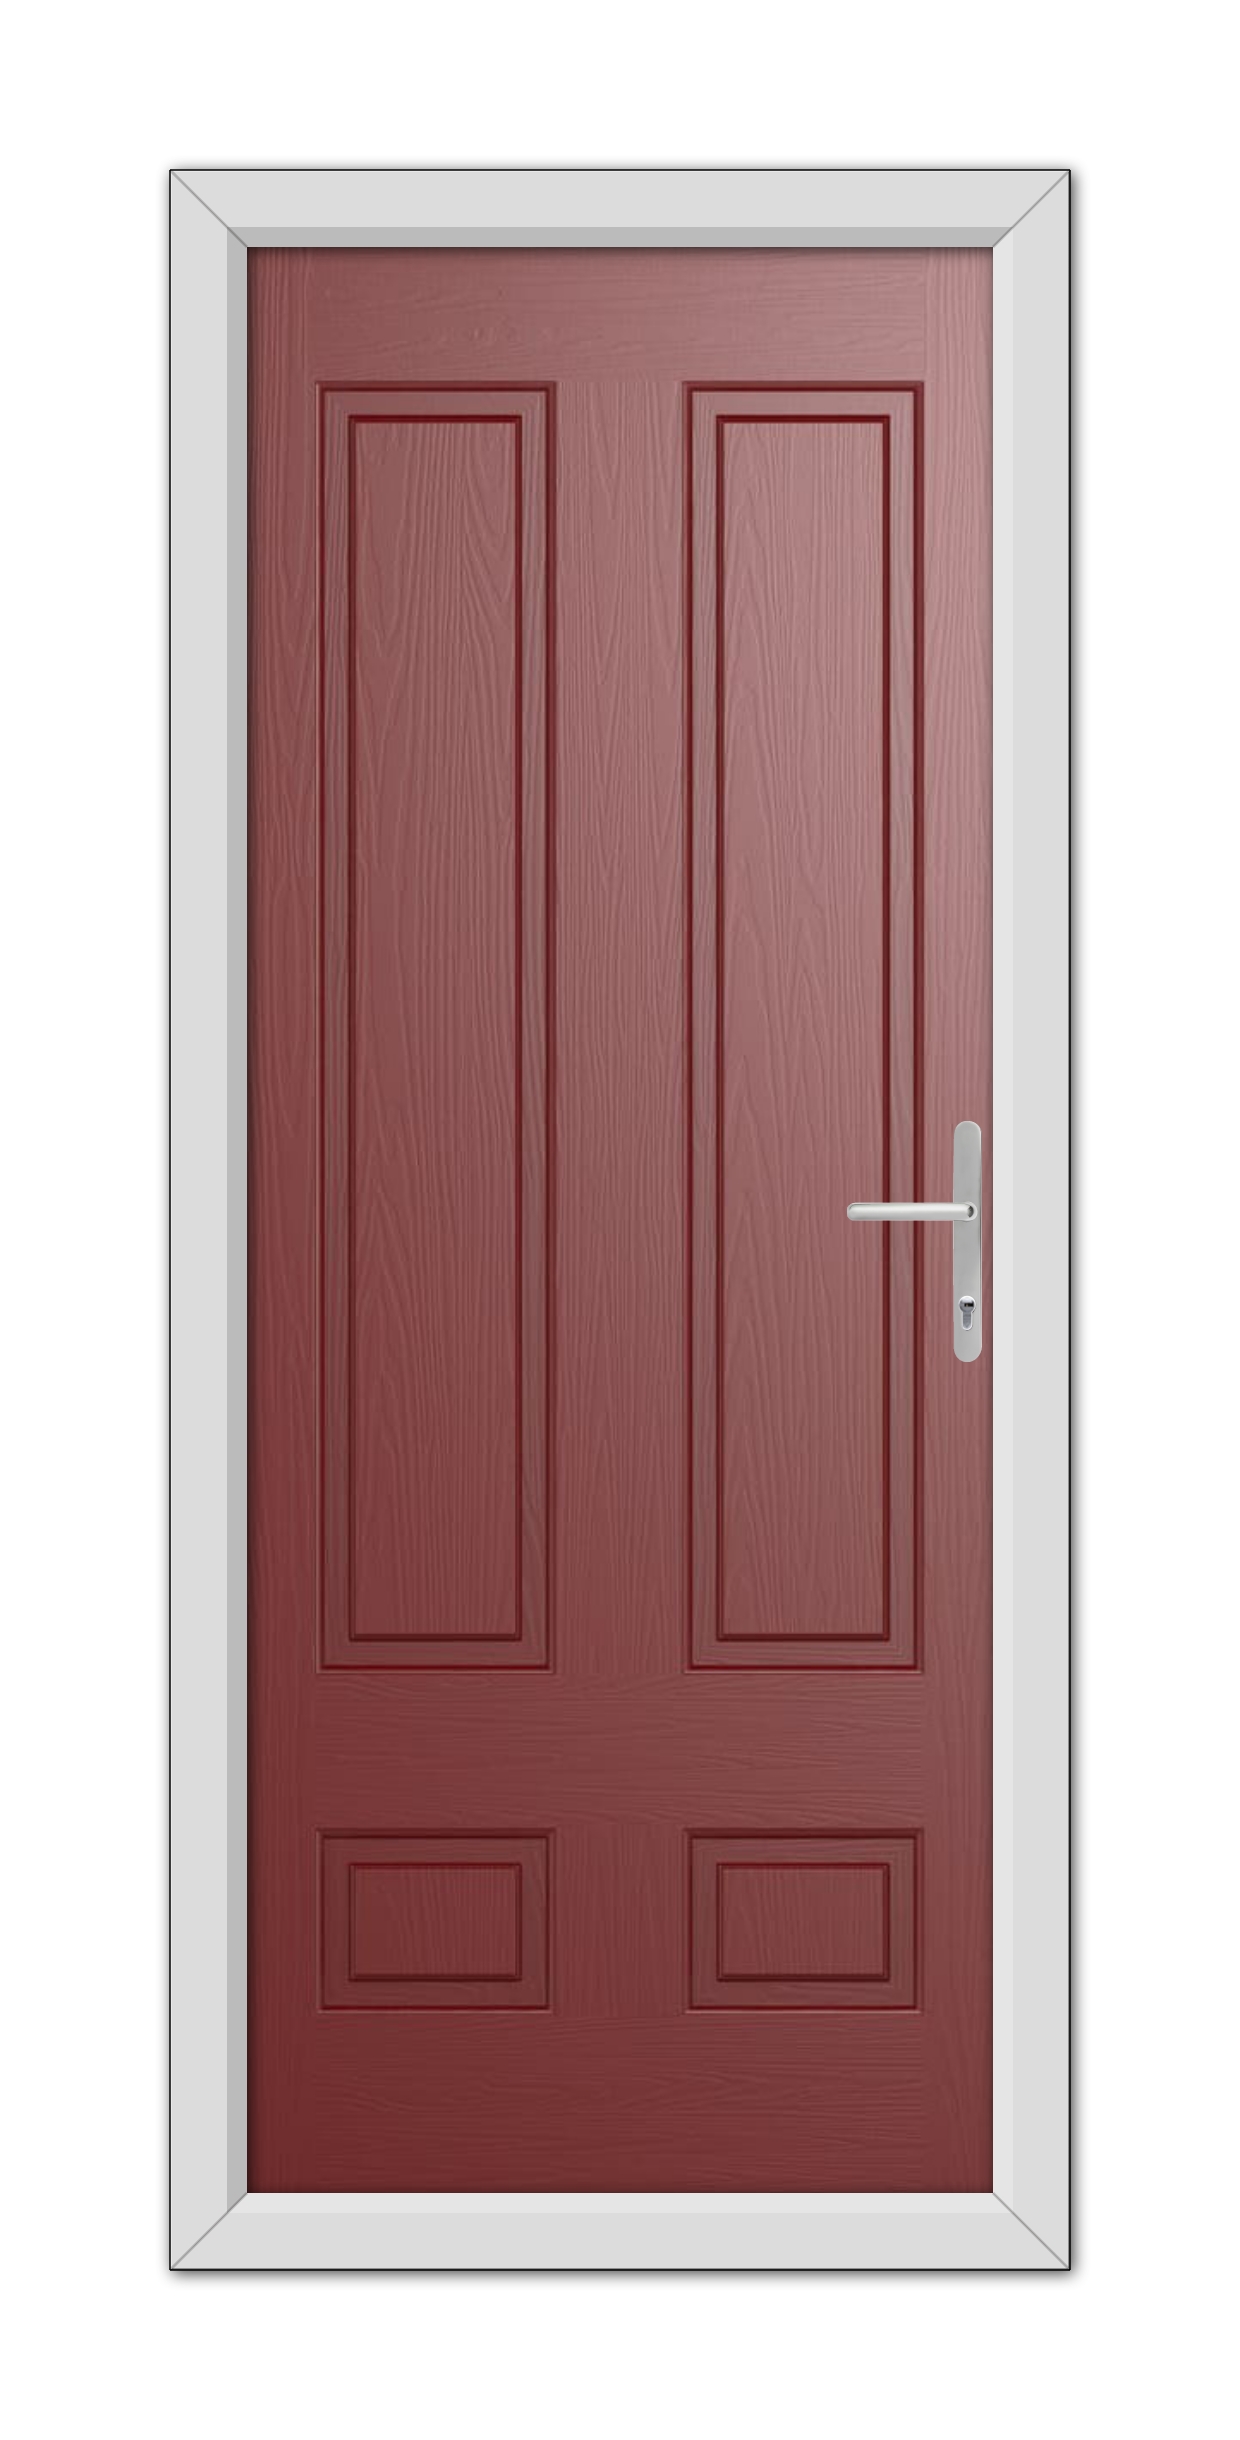 Red Aston Solid Composite Door 48mm Timber Core with a white frame and a modern handle, closed and viewed from the front.